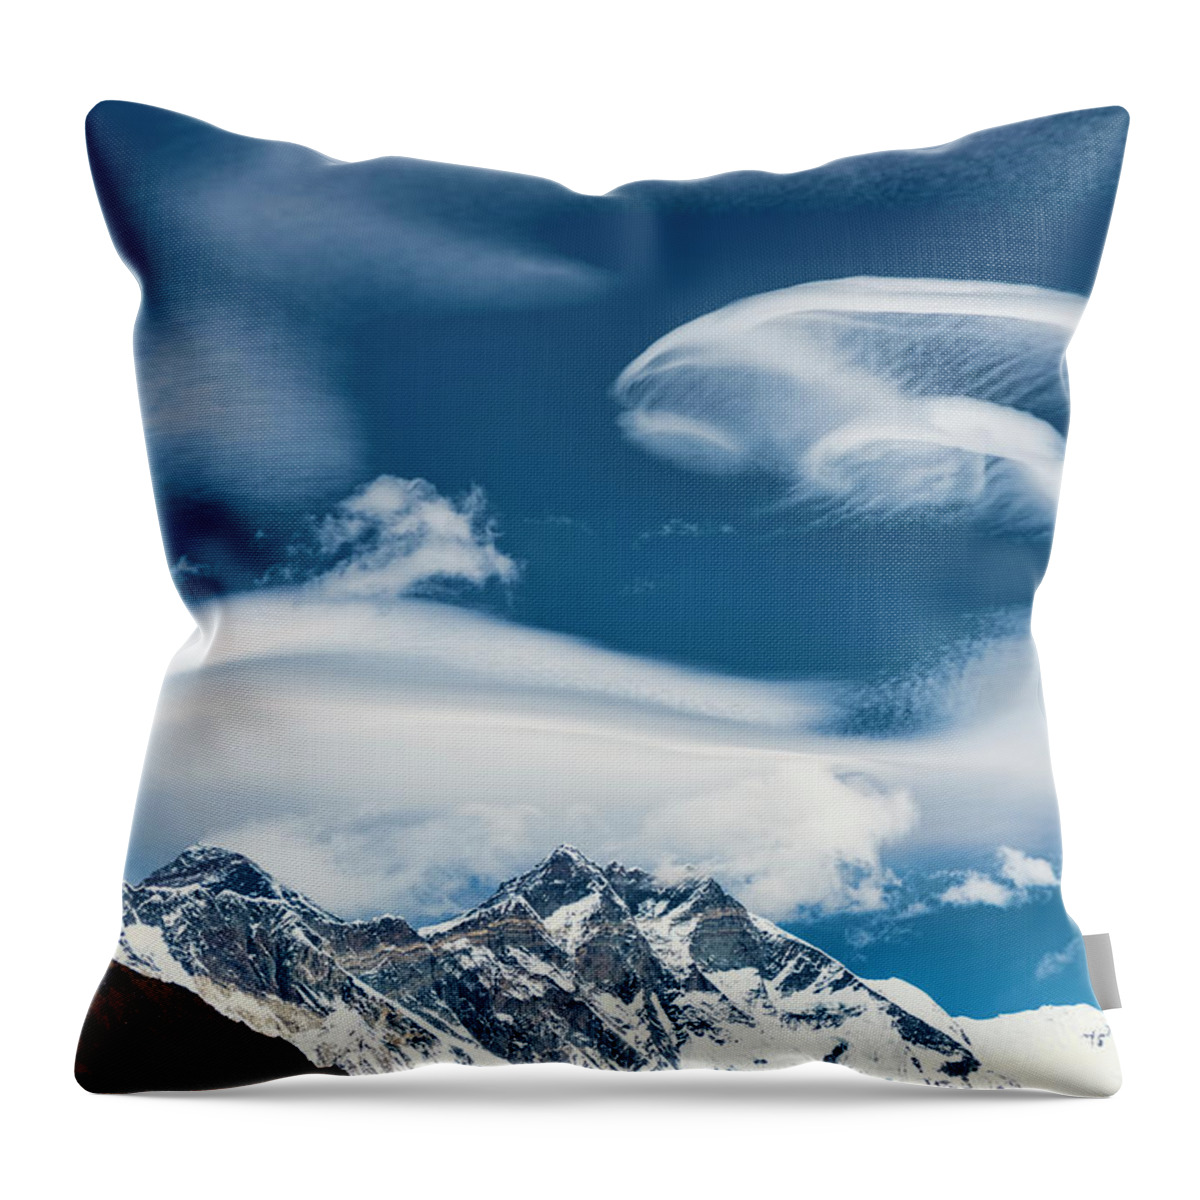 Everest Throw Pillow featuring the photograph Himalayan Sky by Dan McGeorge